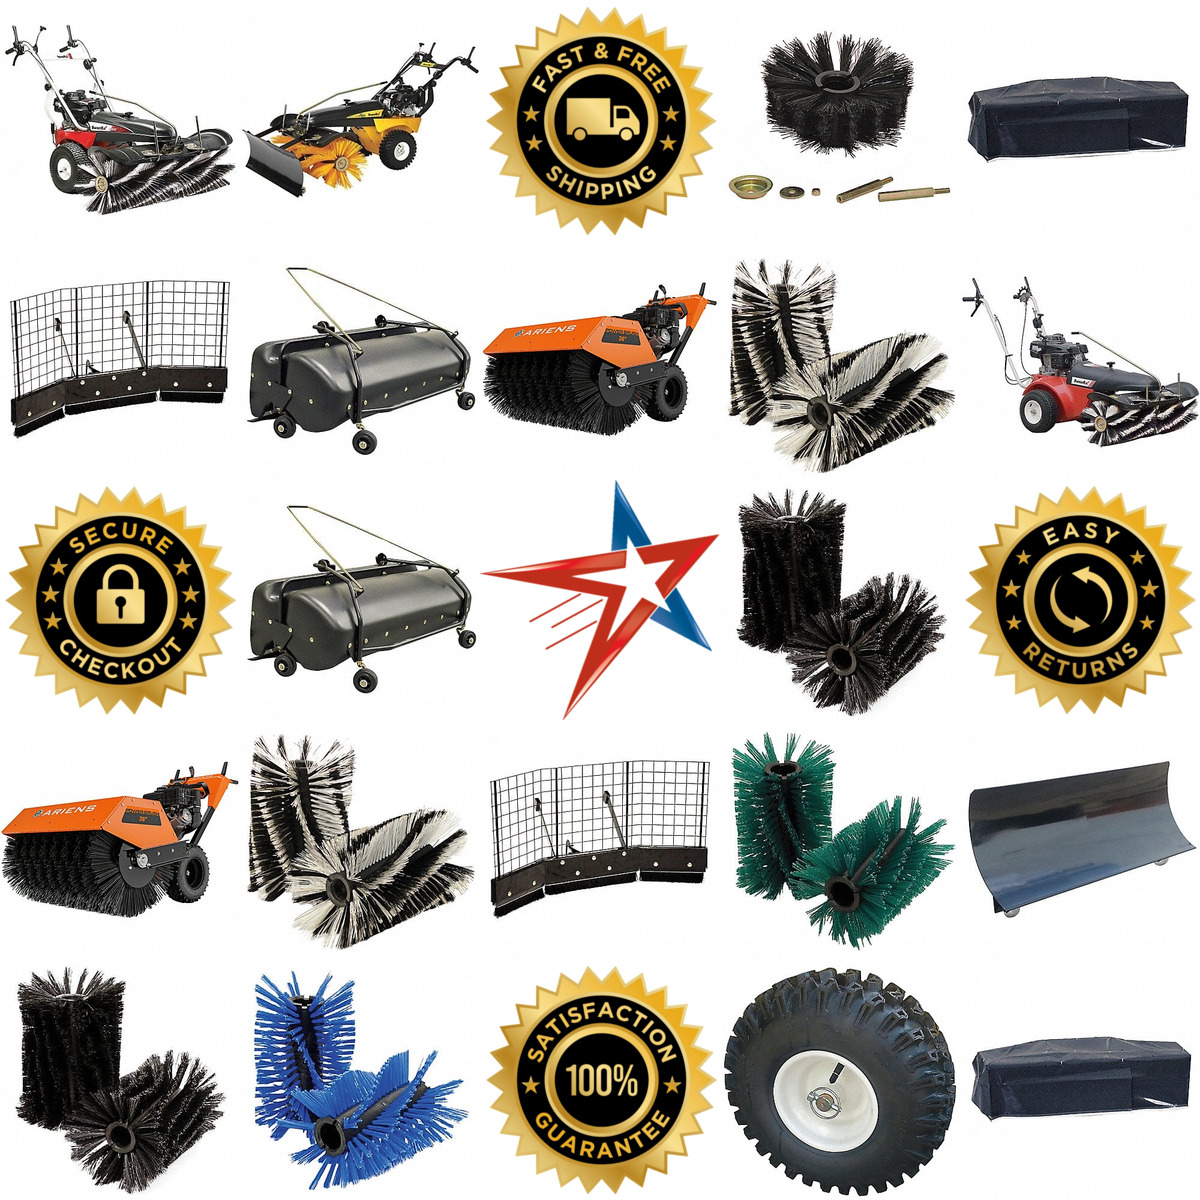 A selection of Power Brushes products on GoVets